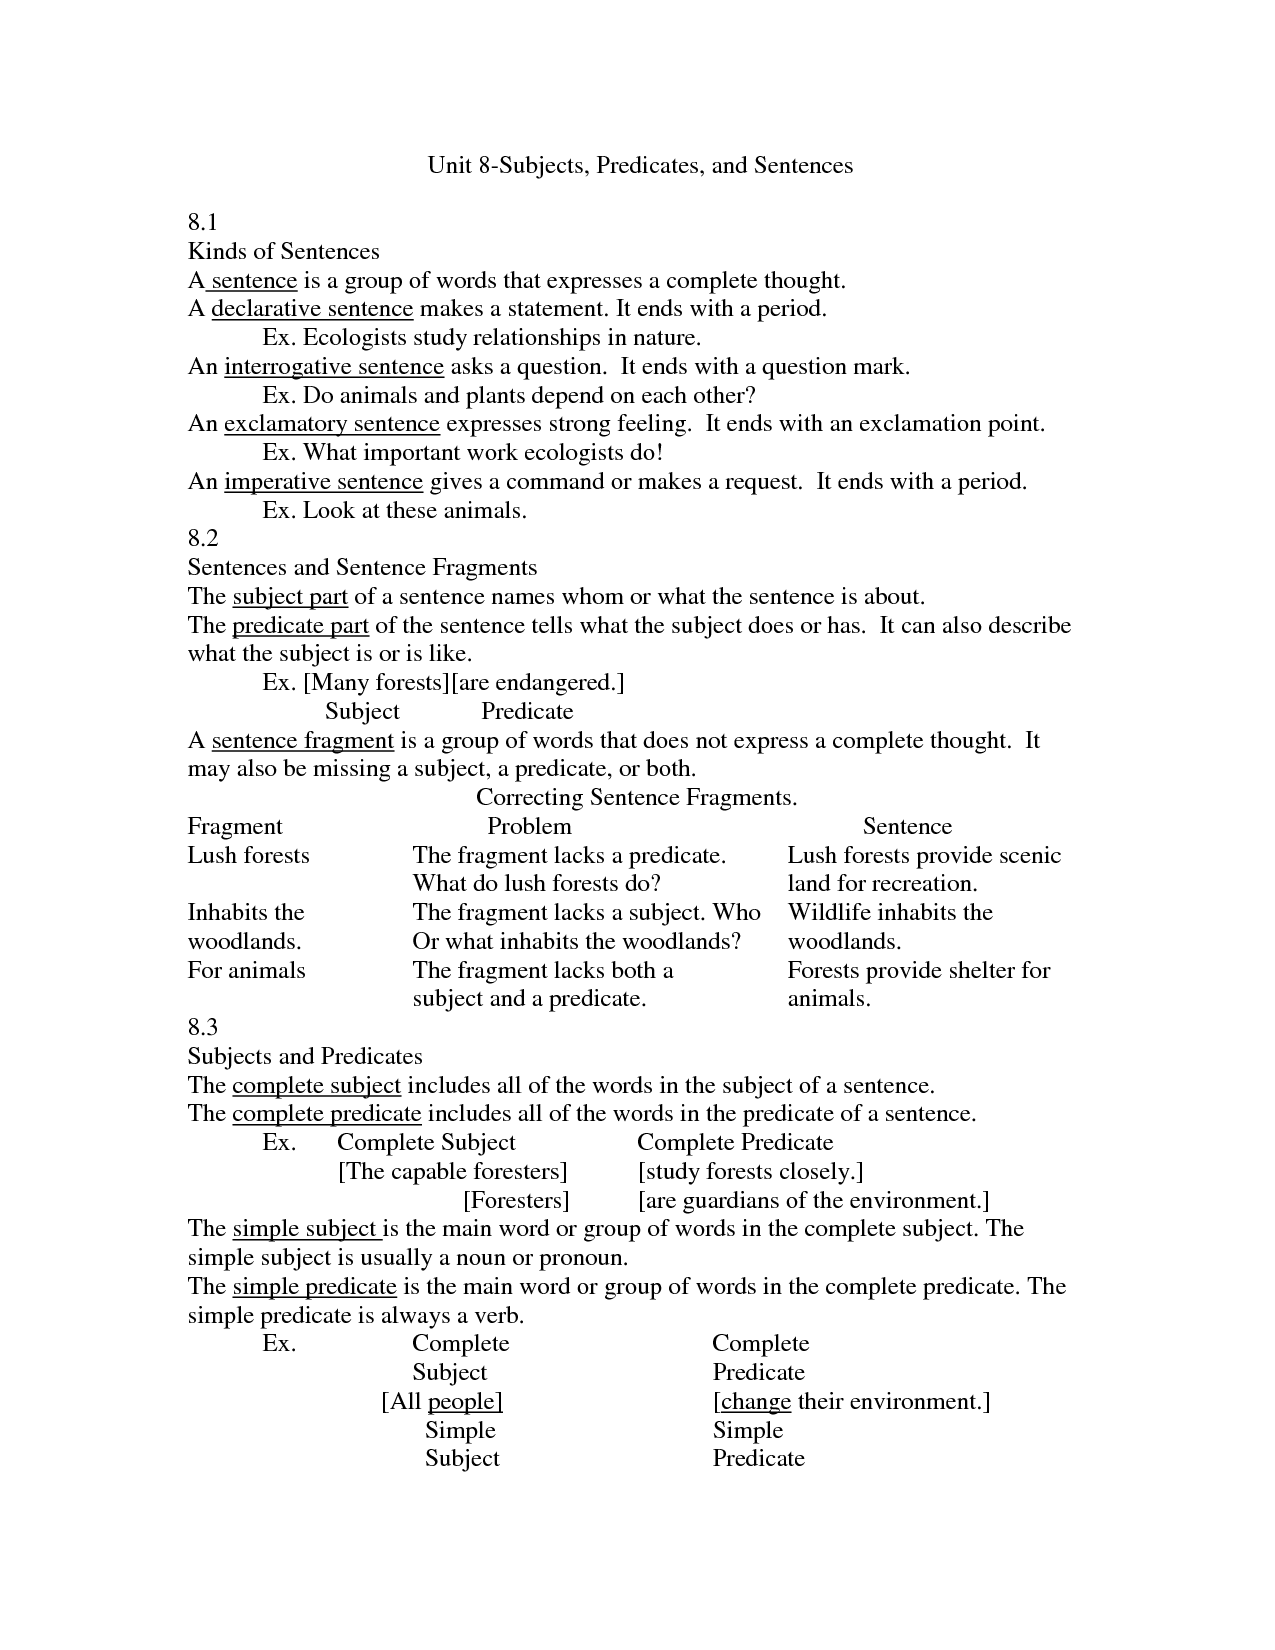 18-best-images-of-exclamatory-sentence-worksheets-declarative-interrogative-imperative-and